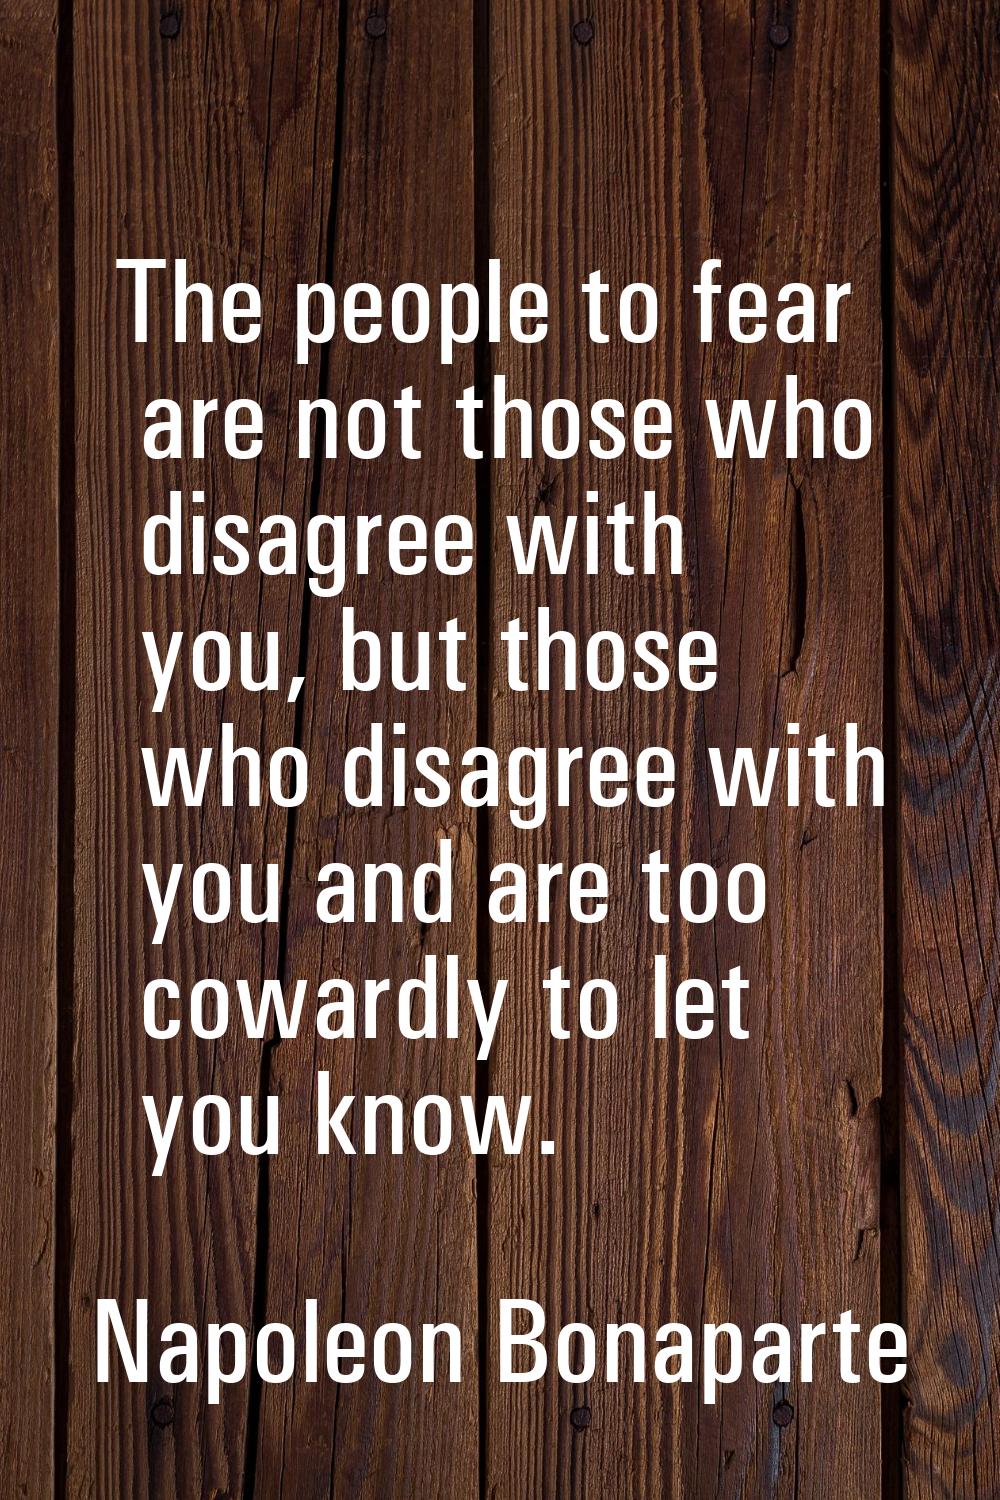 The people to fear are not those who disagree with you, but those who disagree with you and are too